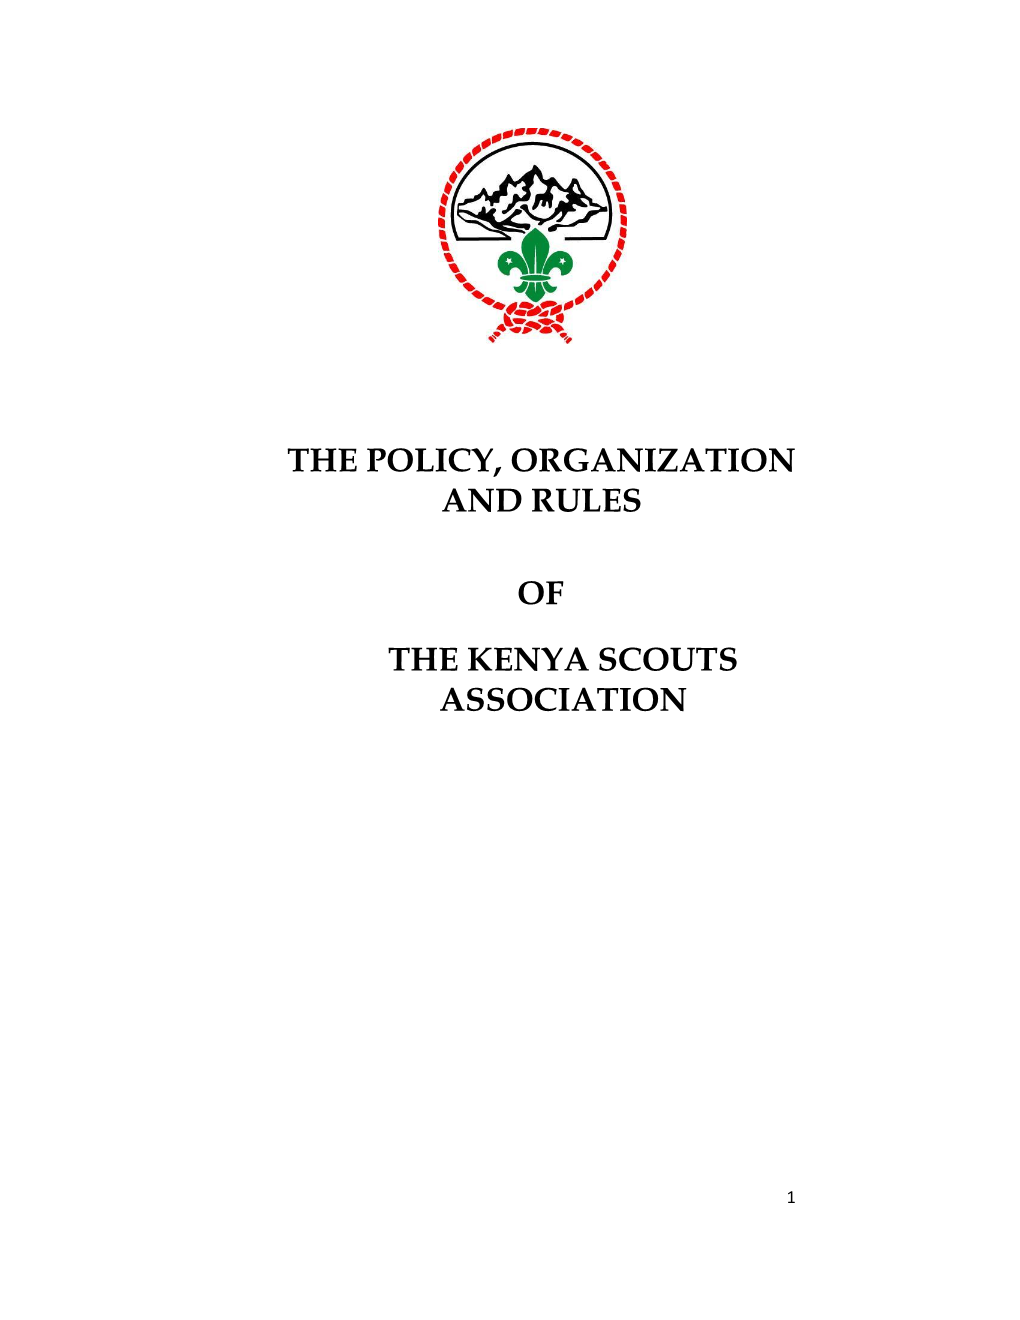 The Policy, Organization and Rules of the Kenya Scouts